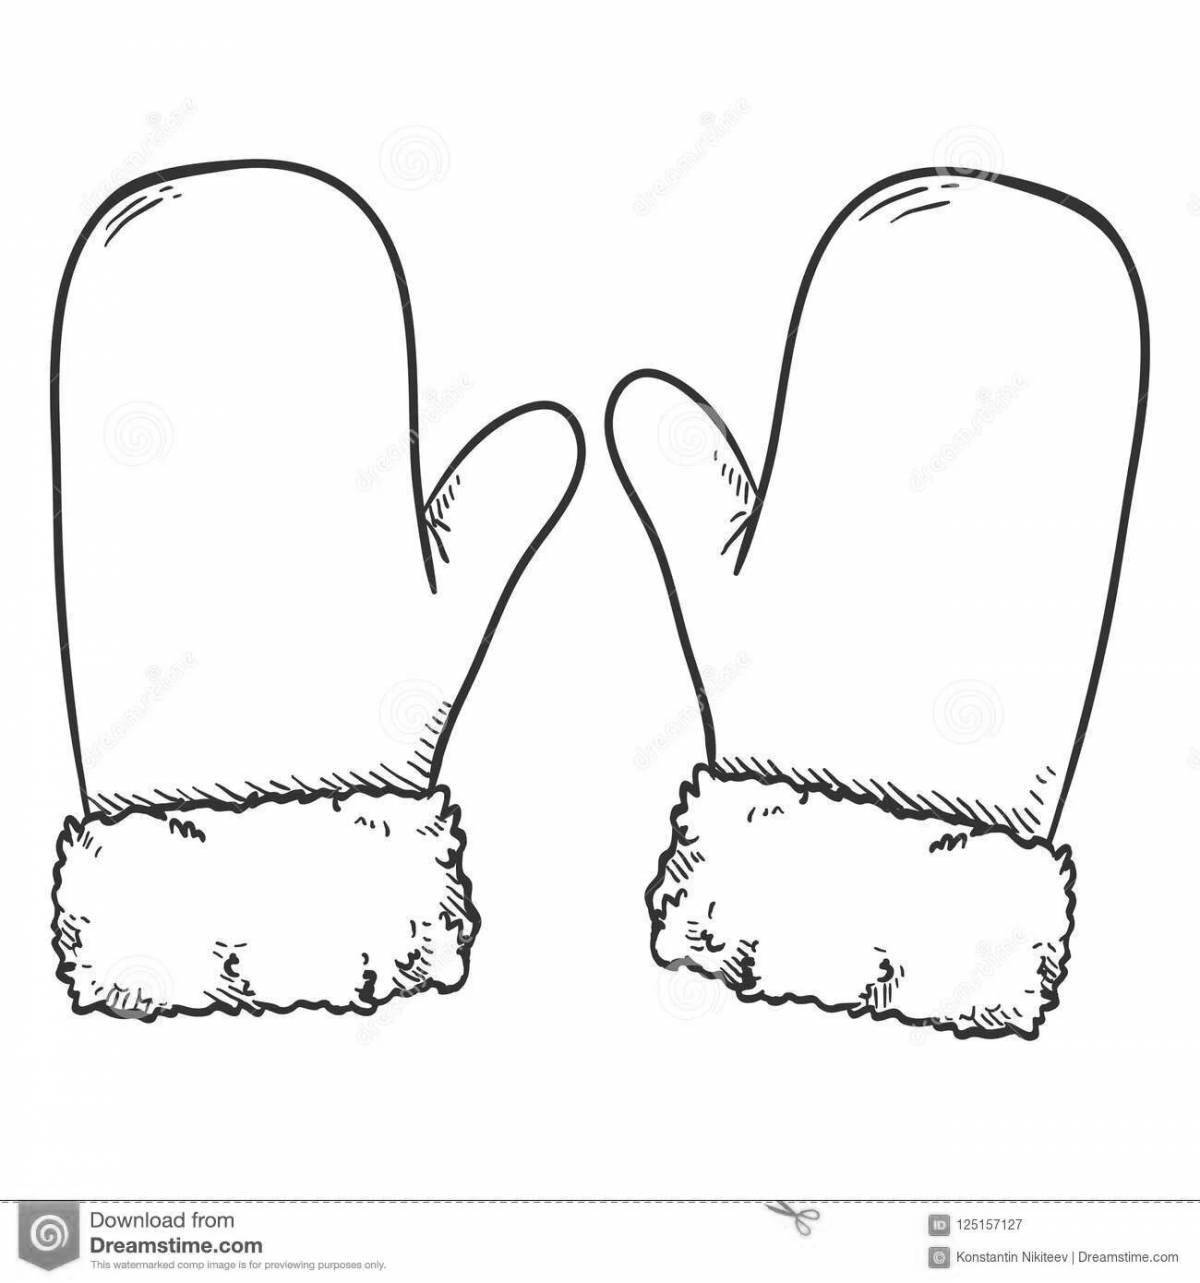 Intriguing rubber mittens coloring page